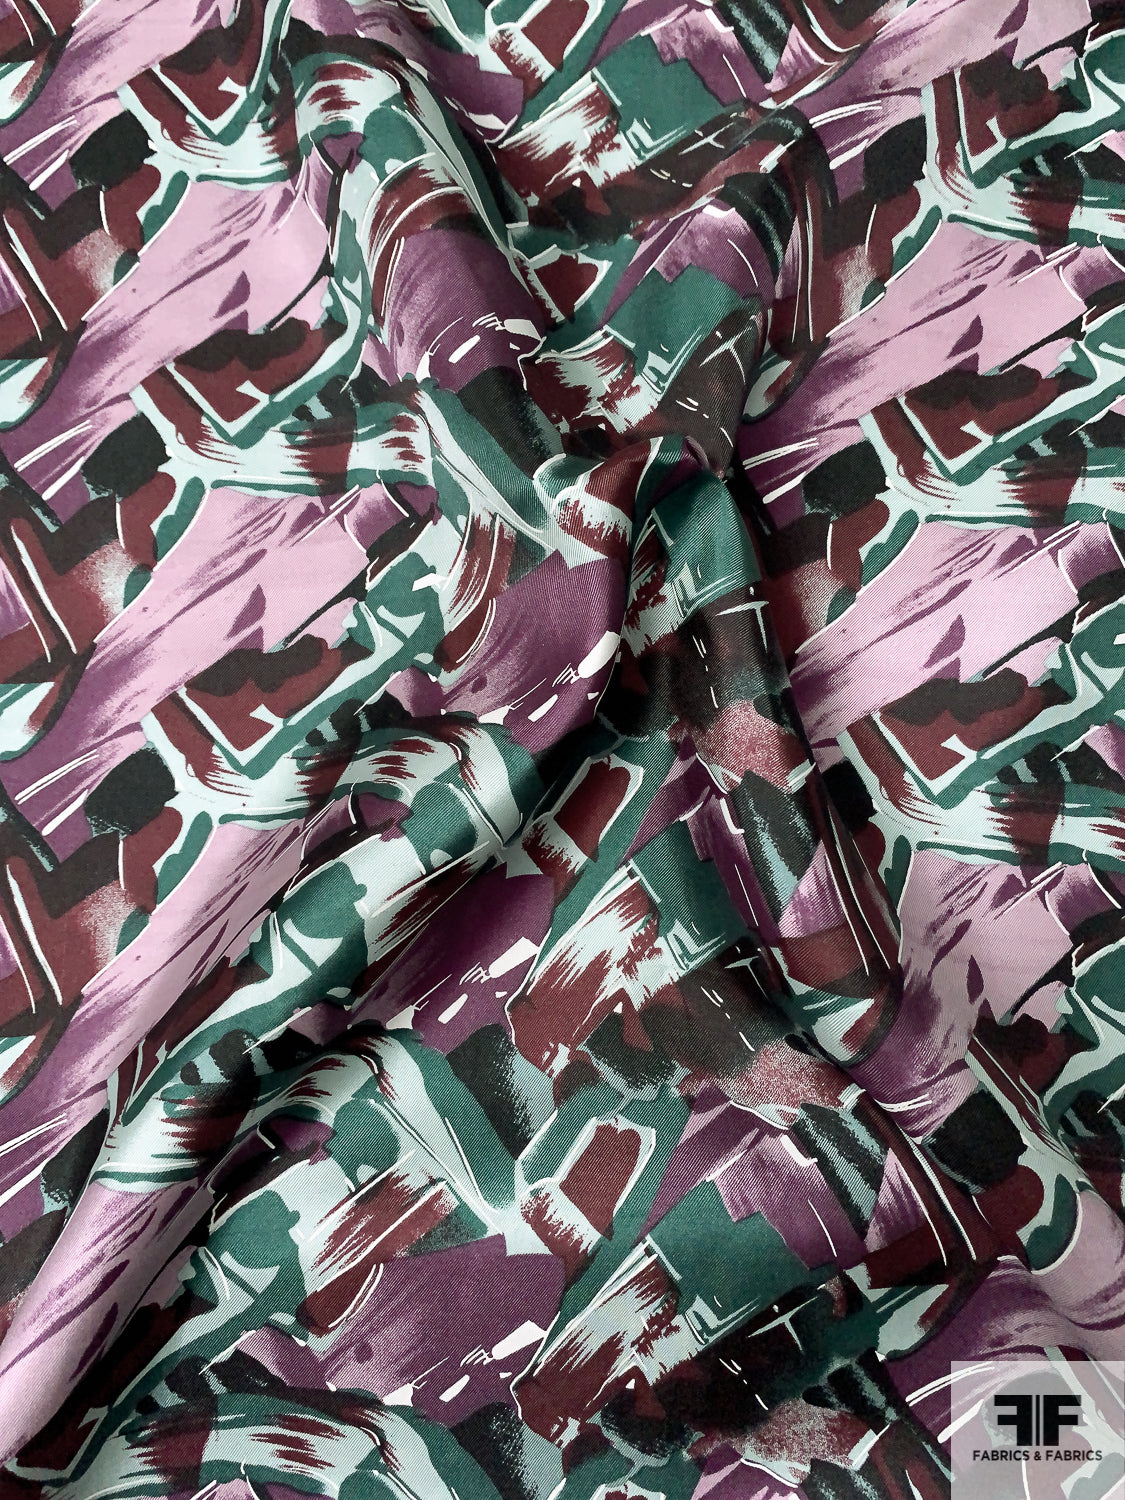 Abstract Graphic Printed Vintage Fine Silk Twill - Shades of Purple / Burgundy / Teal Green